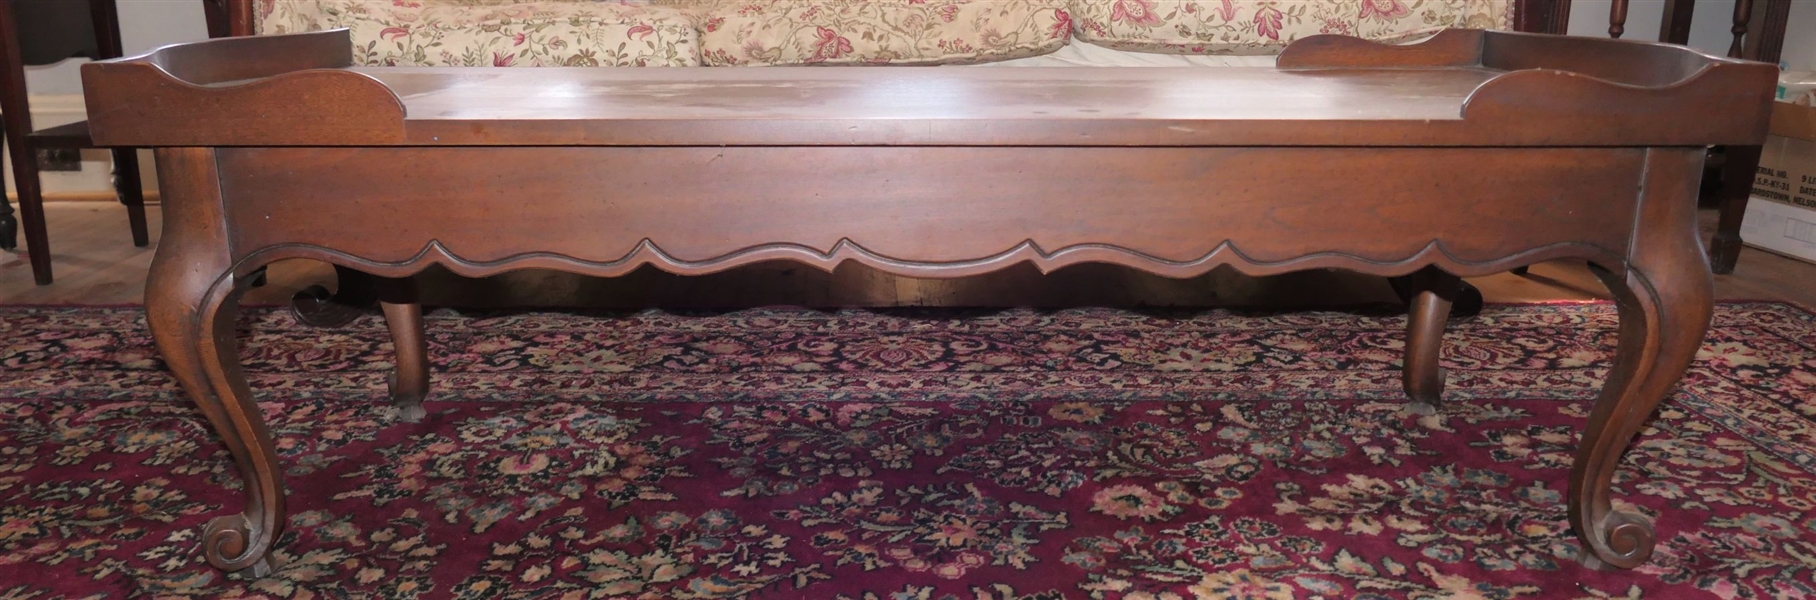 French In the Country Manner by Drexel Coffee Table with Drawer - Missing 1 Piece of Trim - See Photos - Measures 18" Tall 56" by 20"